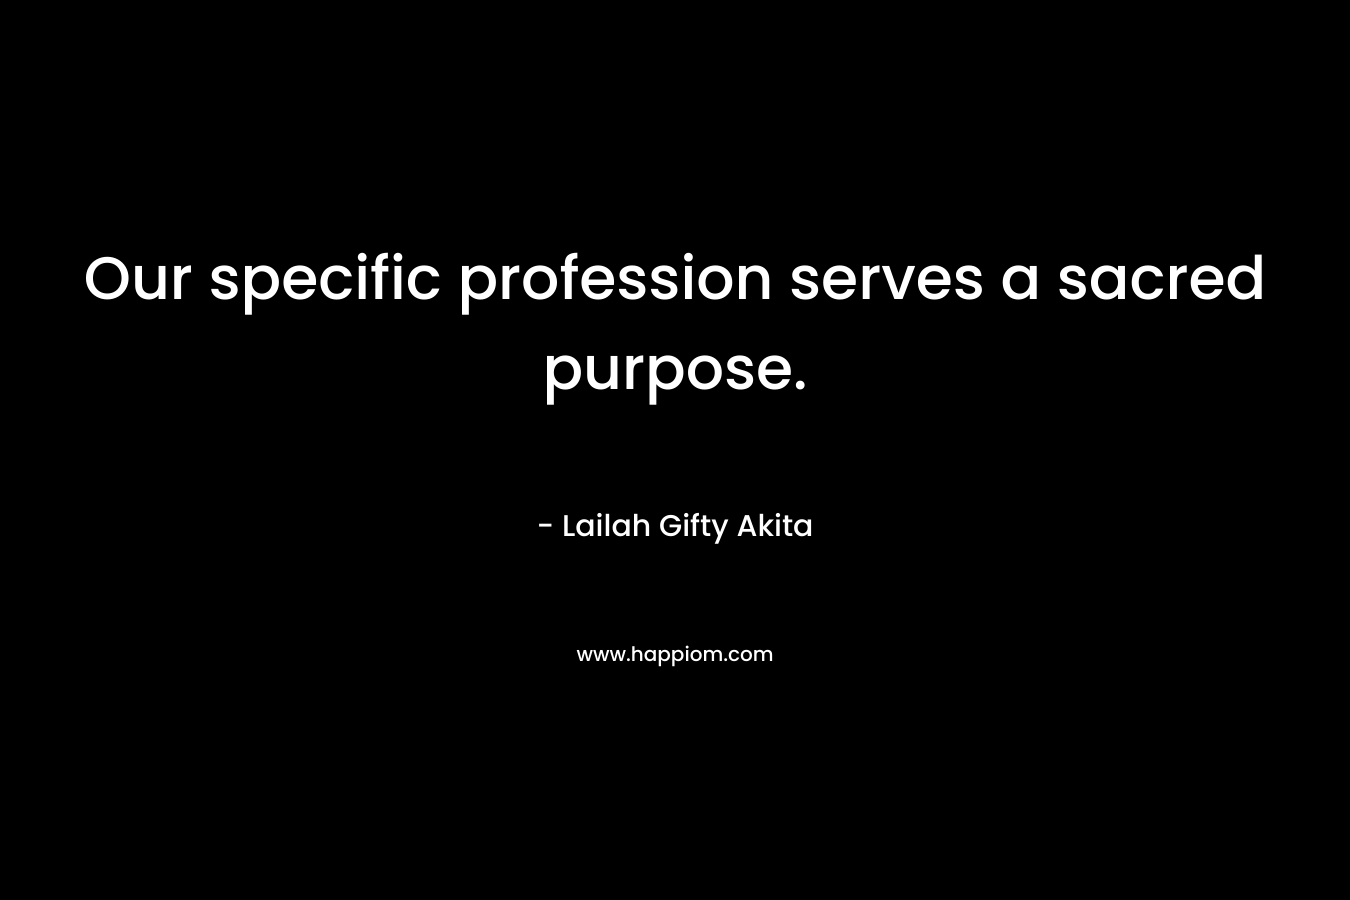 Our specific profession serves a sacred purpose.